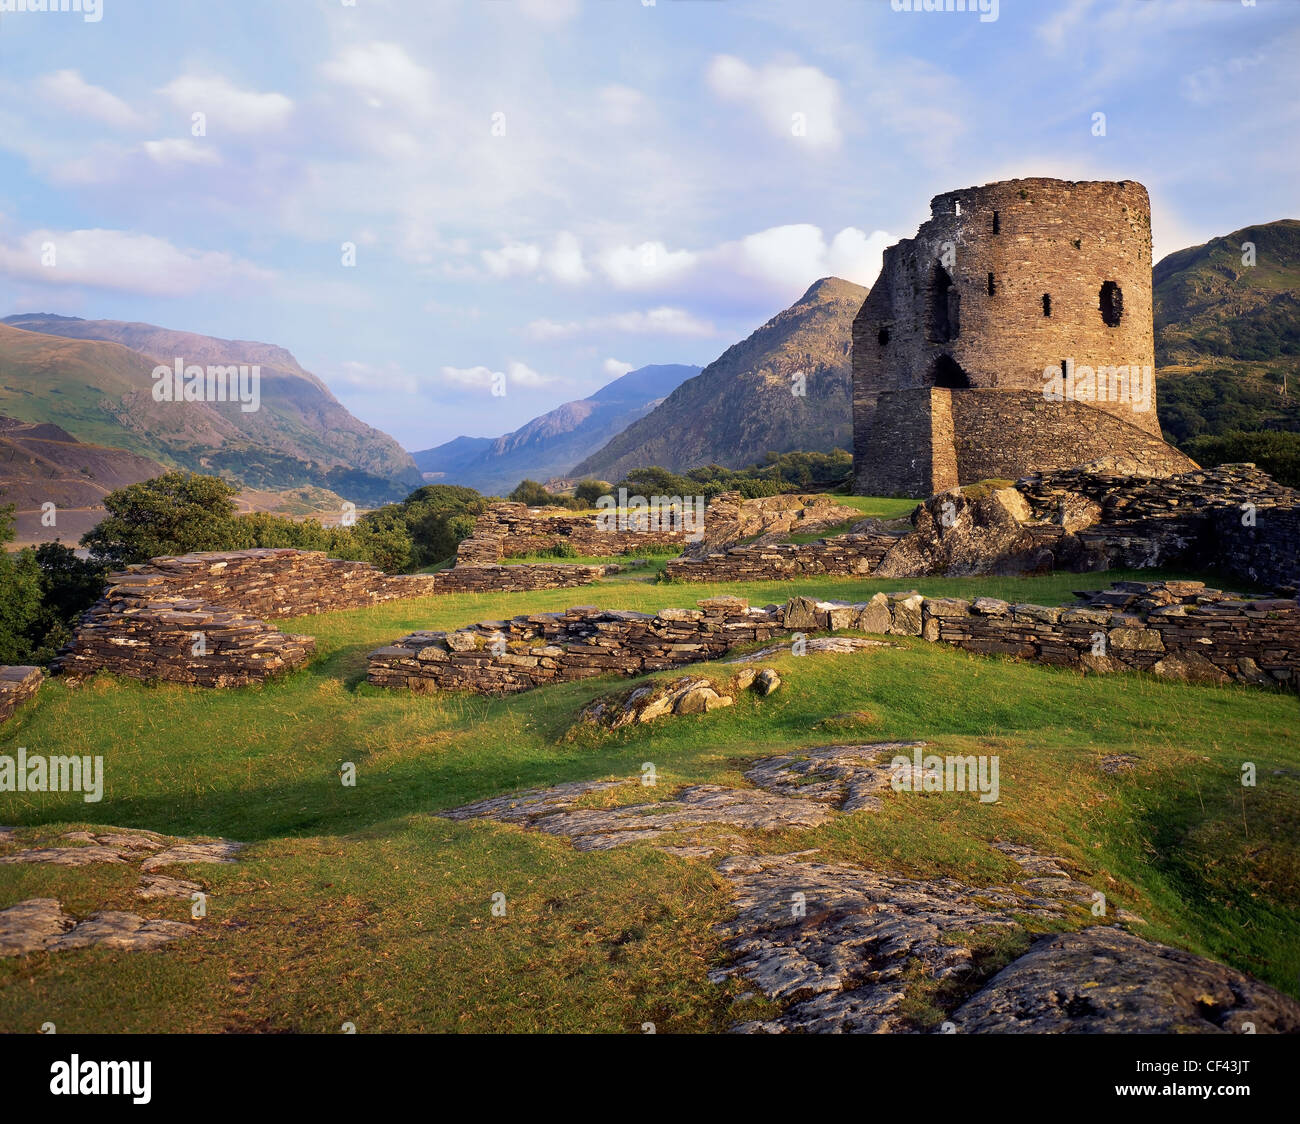 The ruins of Dolbadarn Castle, built by the Princes of Gwynedd in the 13th century, at the foot of Snowdon. Stock Photo